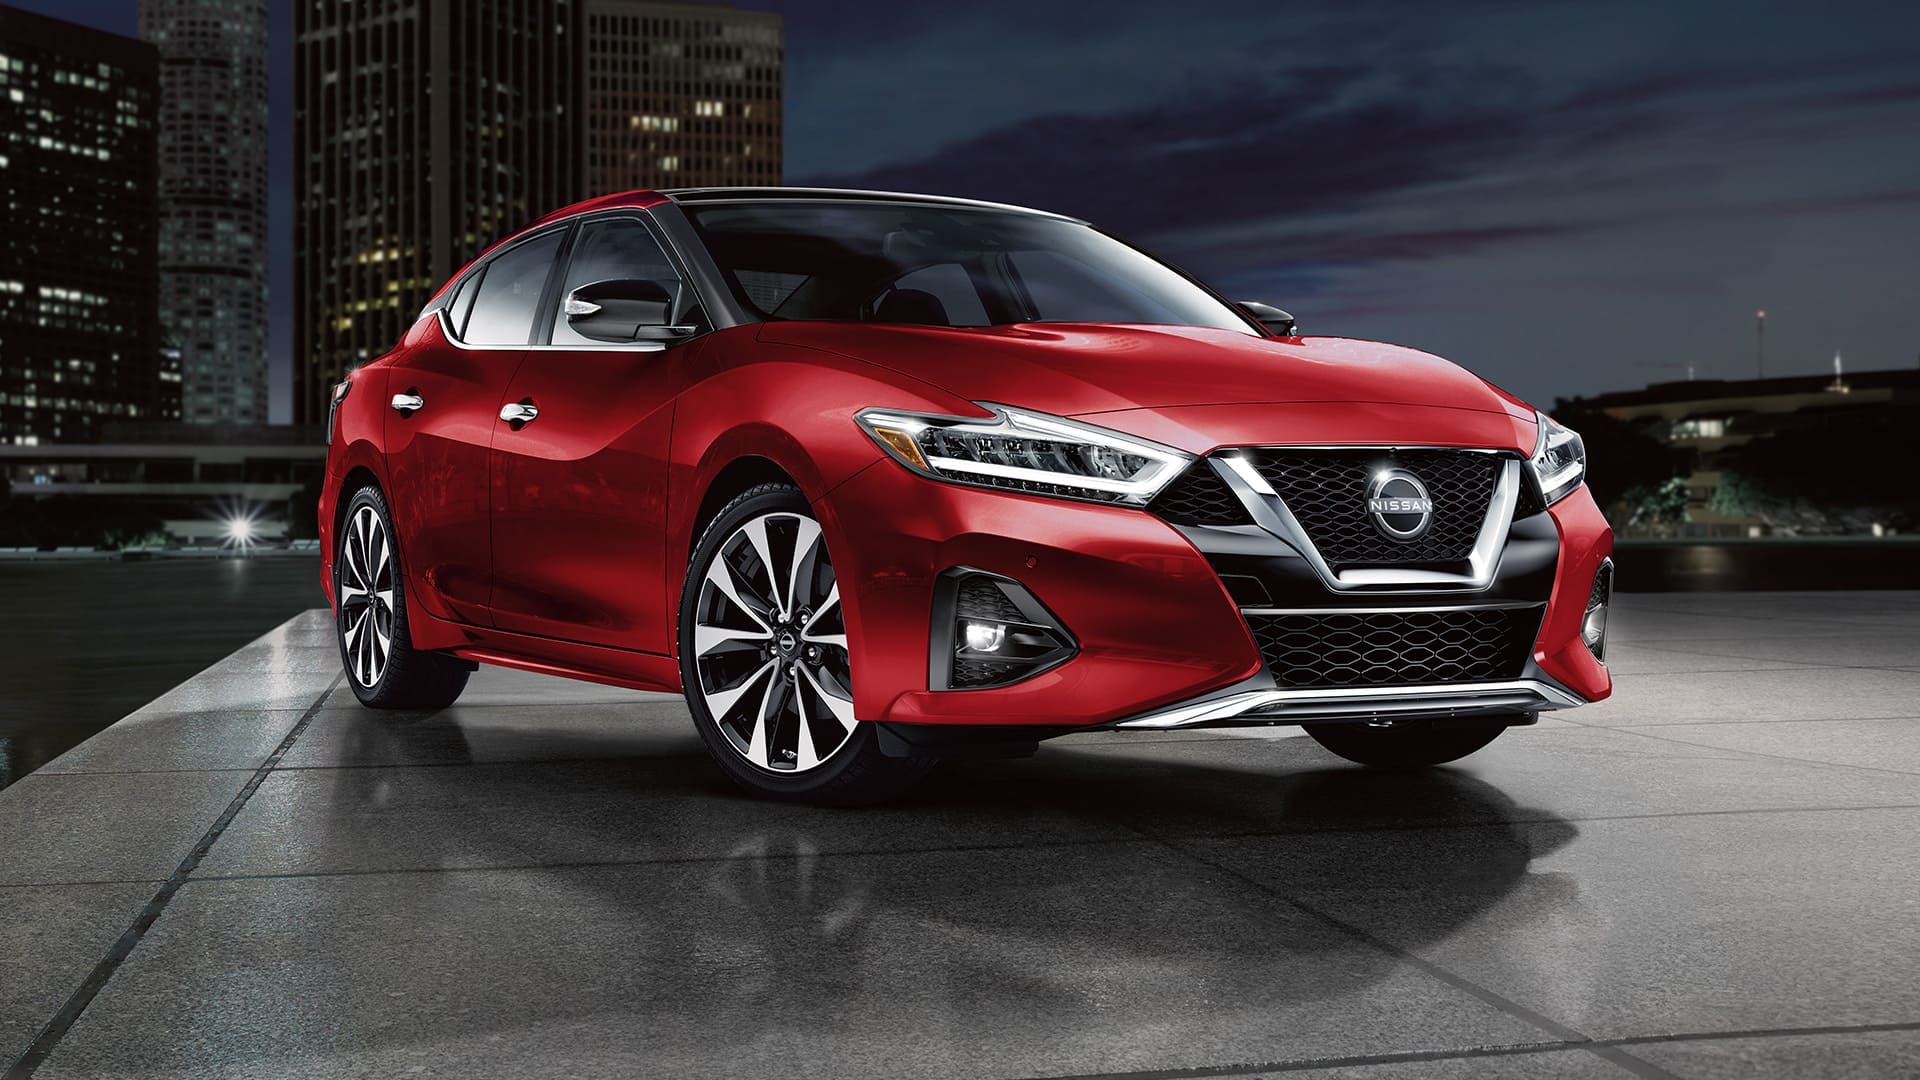 Compare the prices and sizes of Nissan Maxima Models. Conyers Nissan has the latest model with more upgraded features than the 2022 Nissan Maxima, 2021 Nissan Maxima, 2016 Nissan Maxima, and 2010 Nissan Maxima.